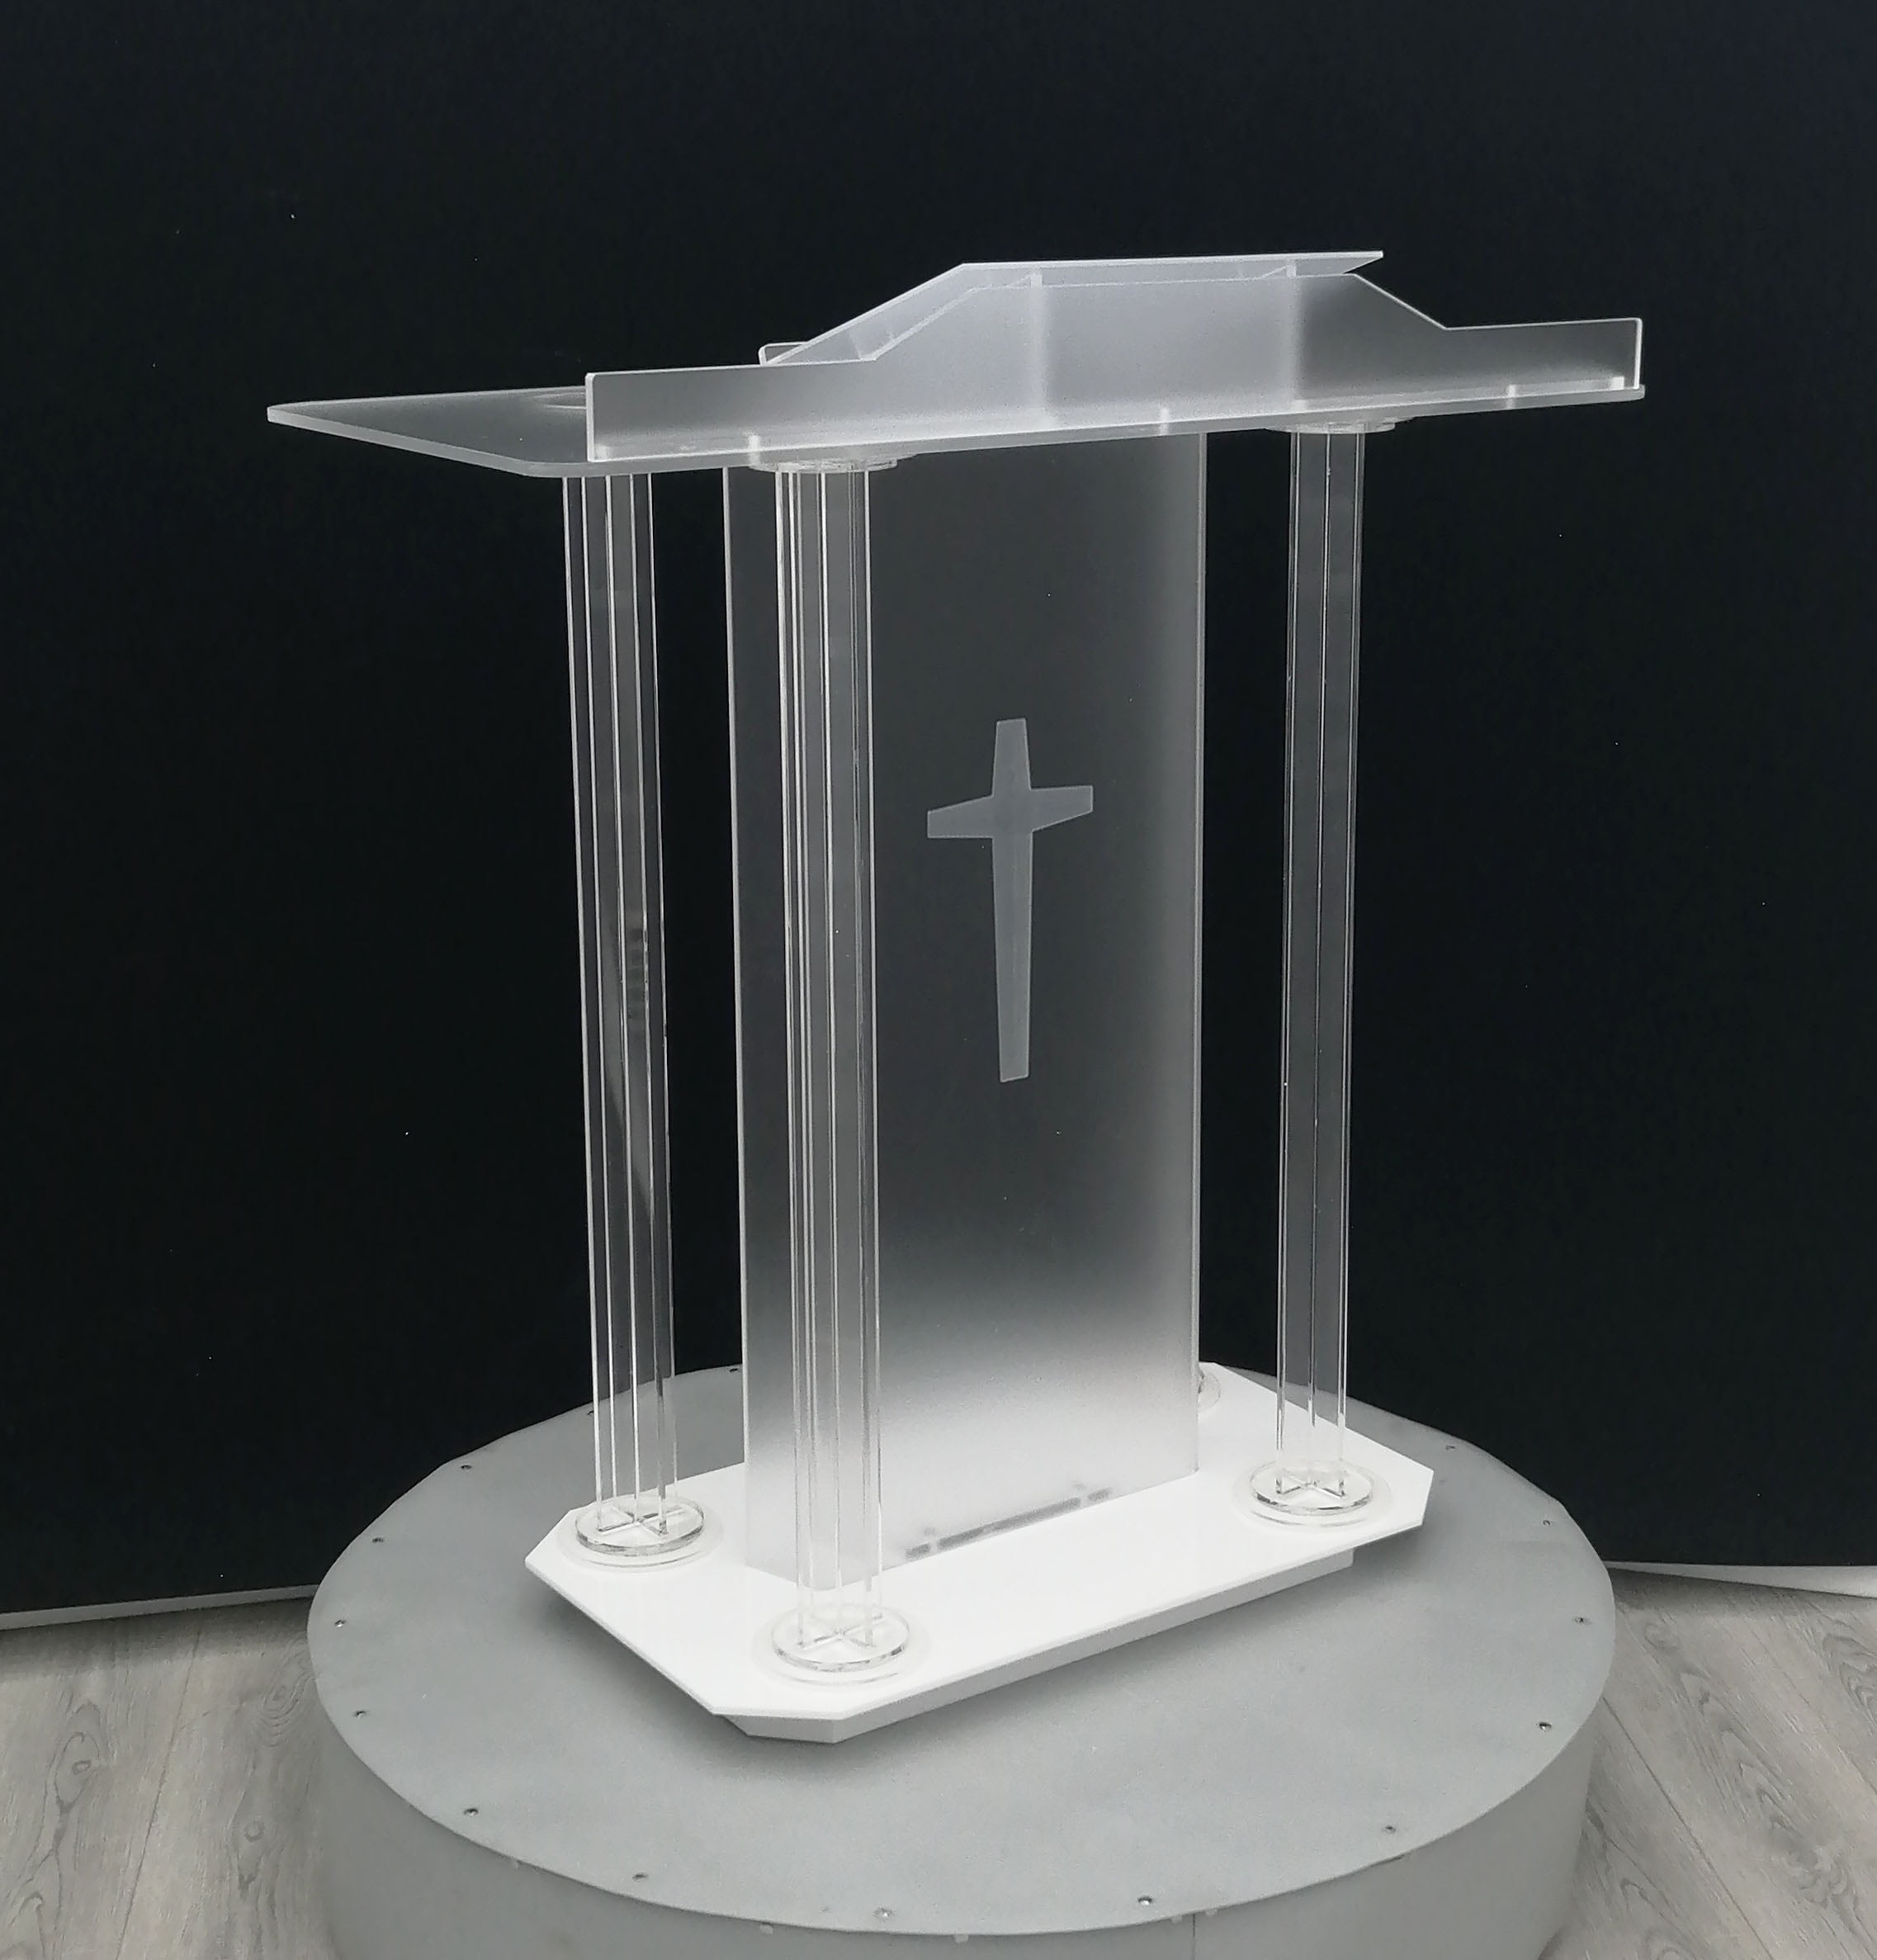 FixtureDisplays Clear Acrylic Plexiglass Podium Curved Steel Sides Church Pulpit School Lectern Debate Funeral Home Conference 14310-NF 